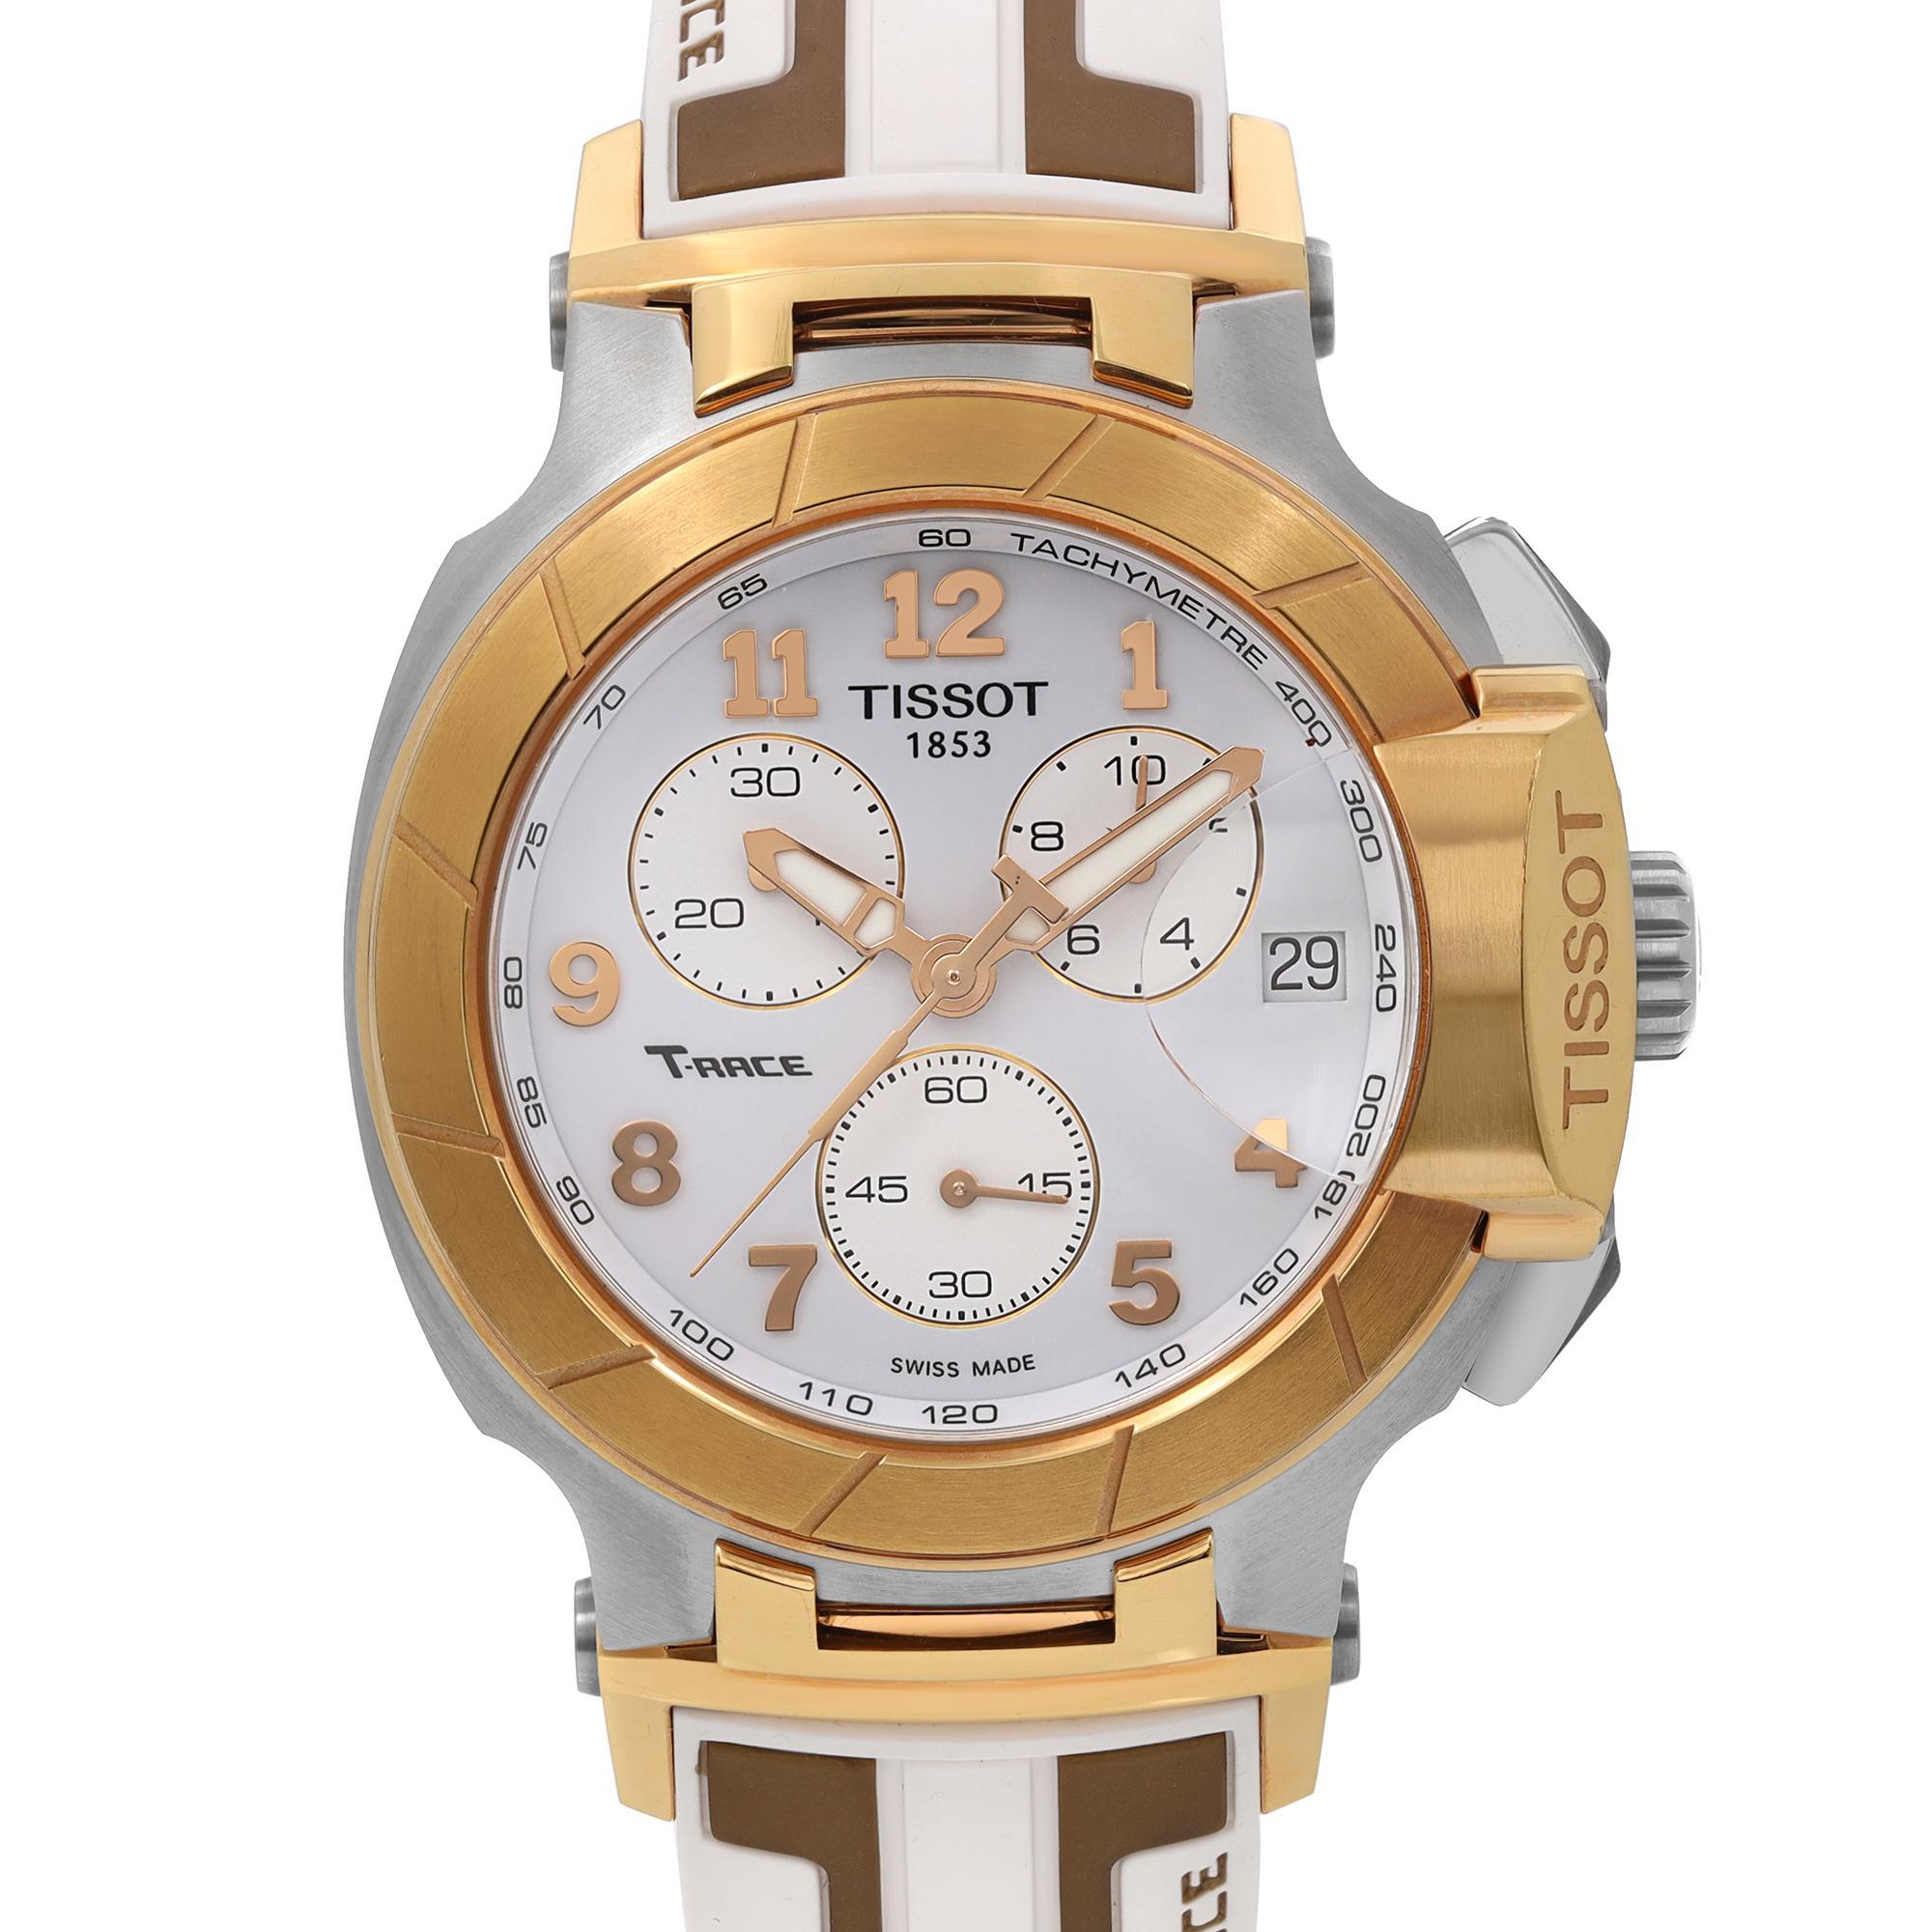 Pre-owned Tissot T-Race Steel Rose Gold-Tone Silicone Men's Quartz Watch T0484172701200. Minor Blemishes on the Bezel. This Beautiful Timepiece is Powered by Quartz (Battery) Movement And Features: Round Stainless Steel Case, White & Brown Tone